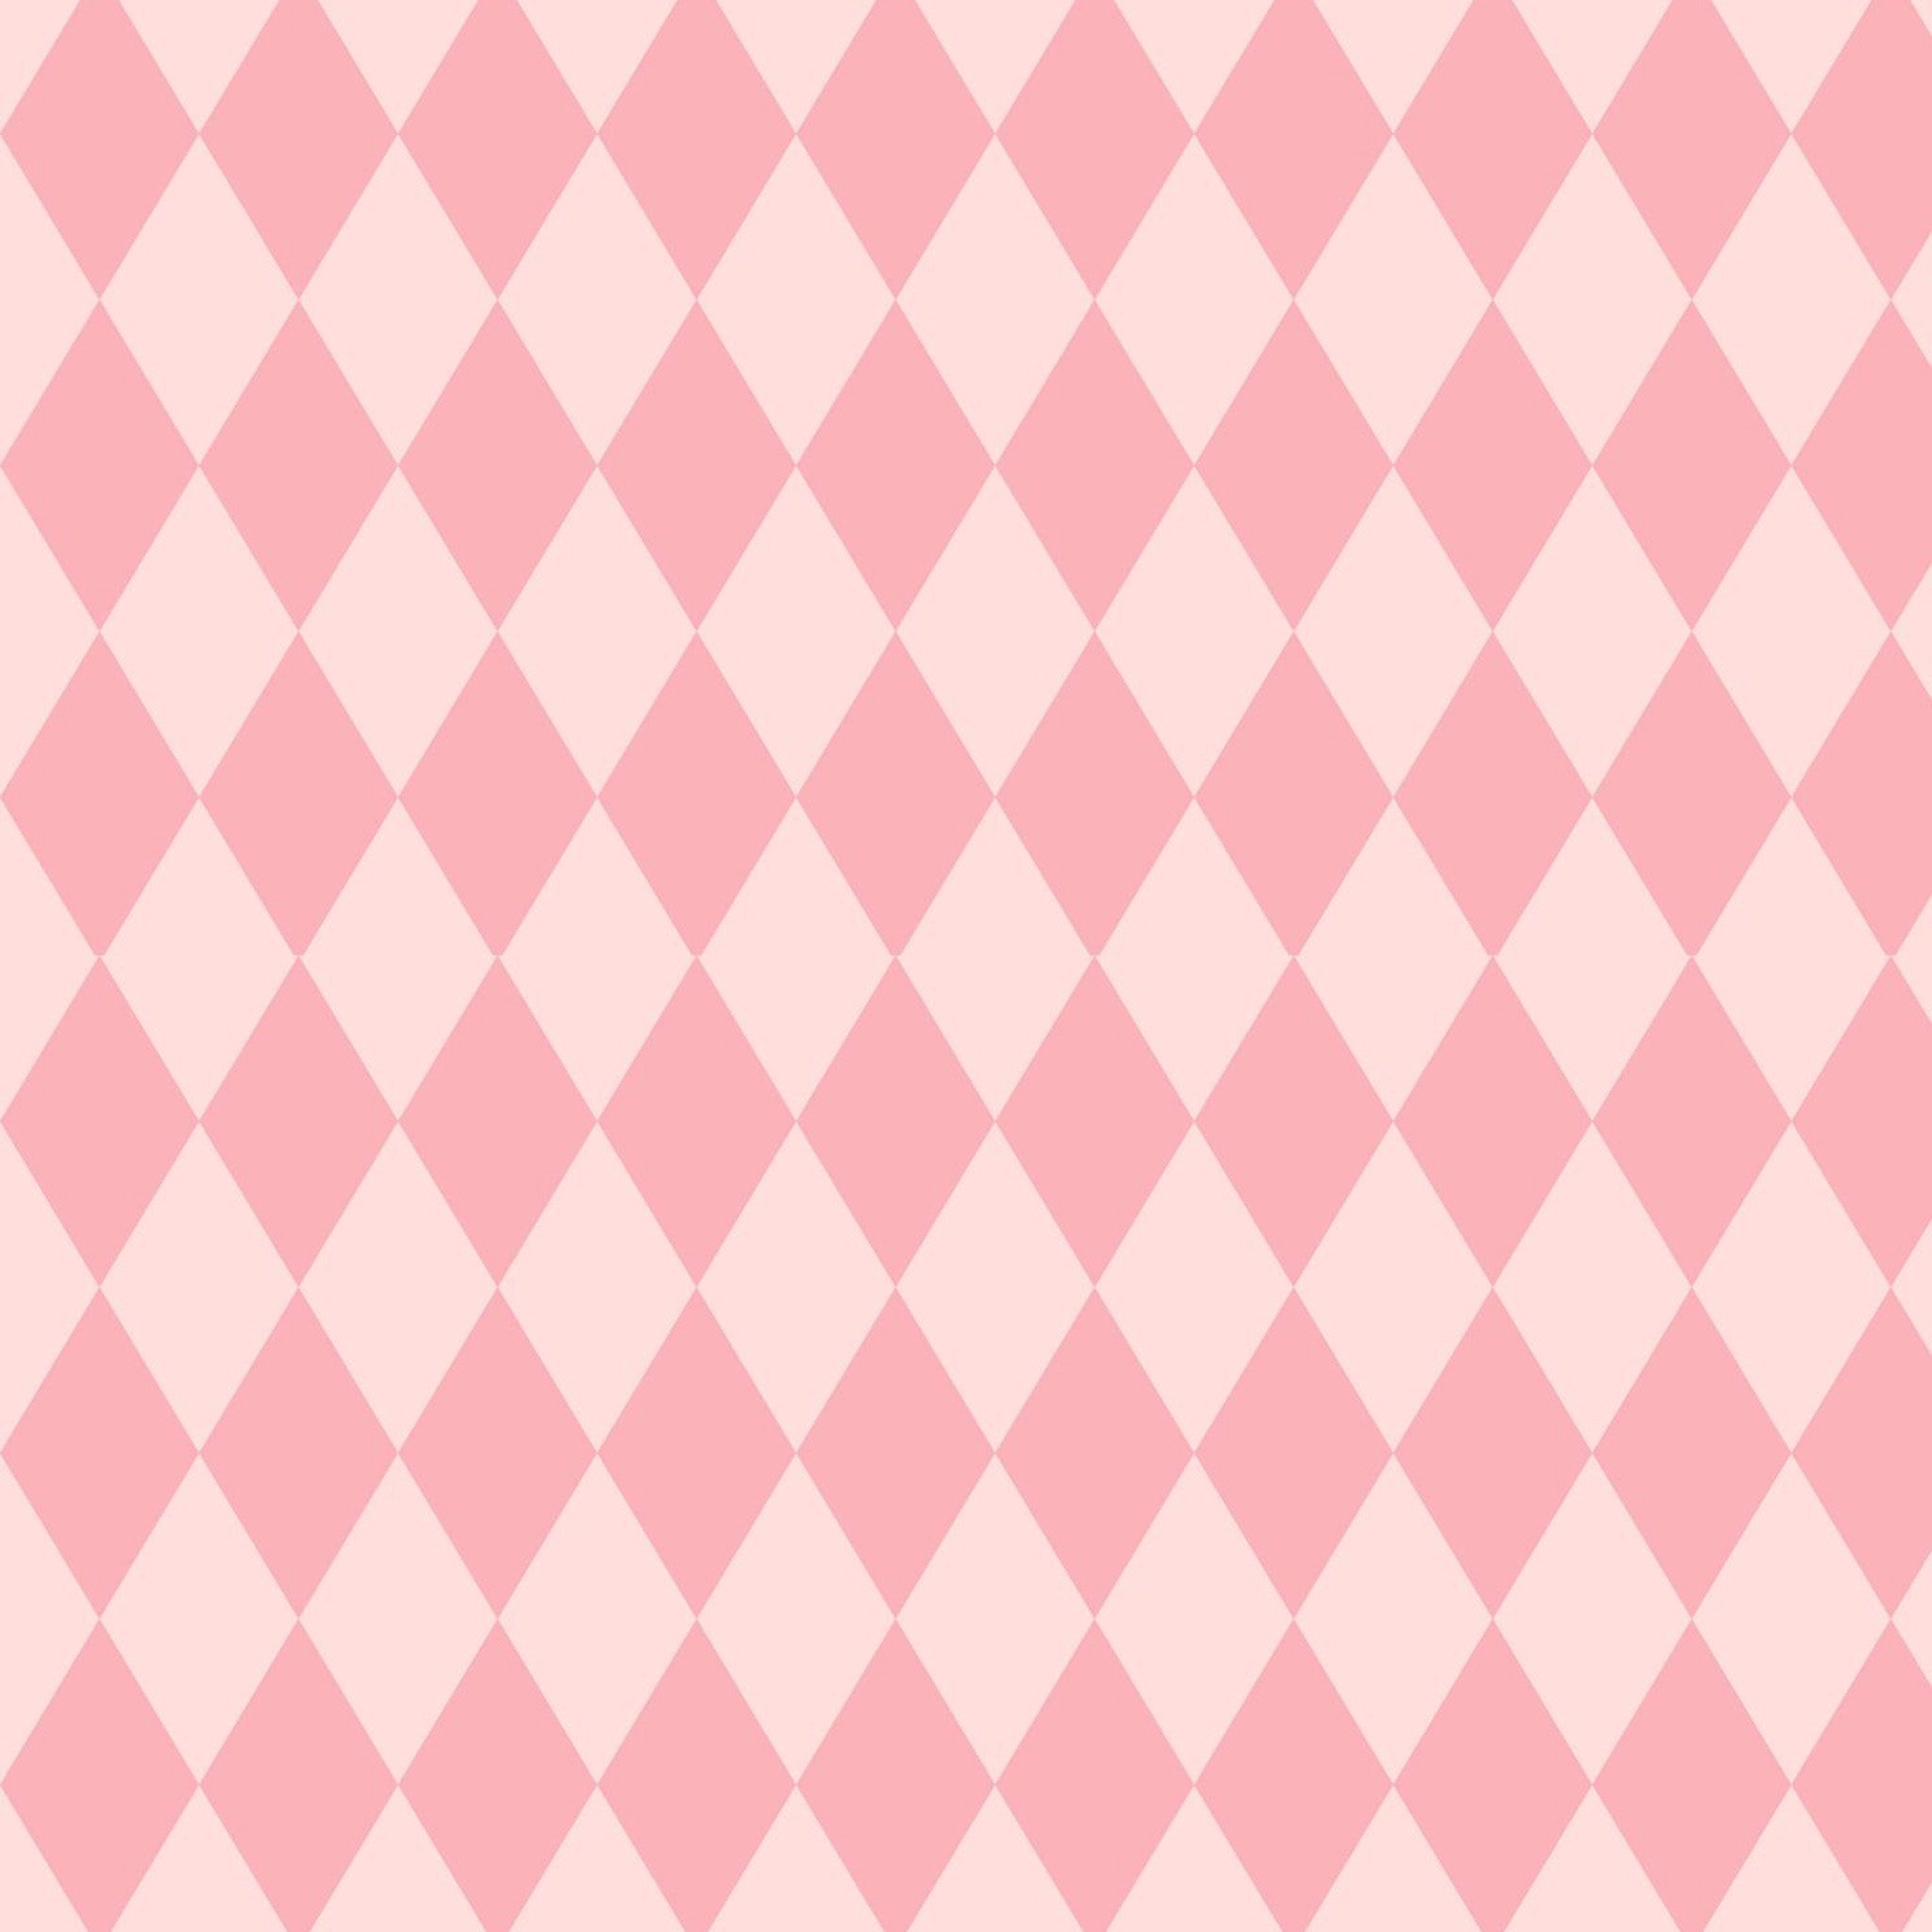 Close-up of a tissue paper design featuring a playful pink harlequin diamond pattern.